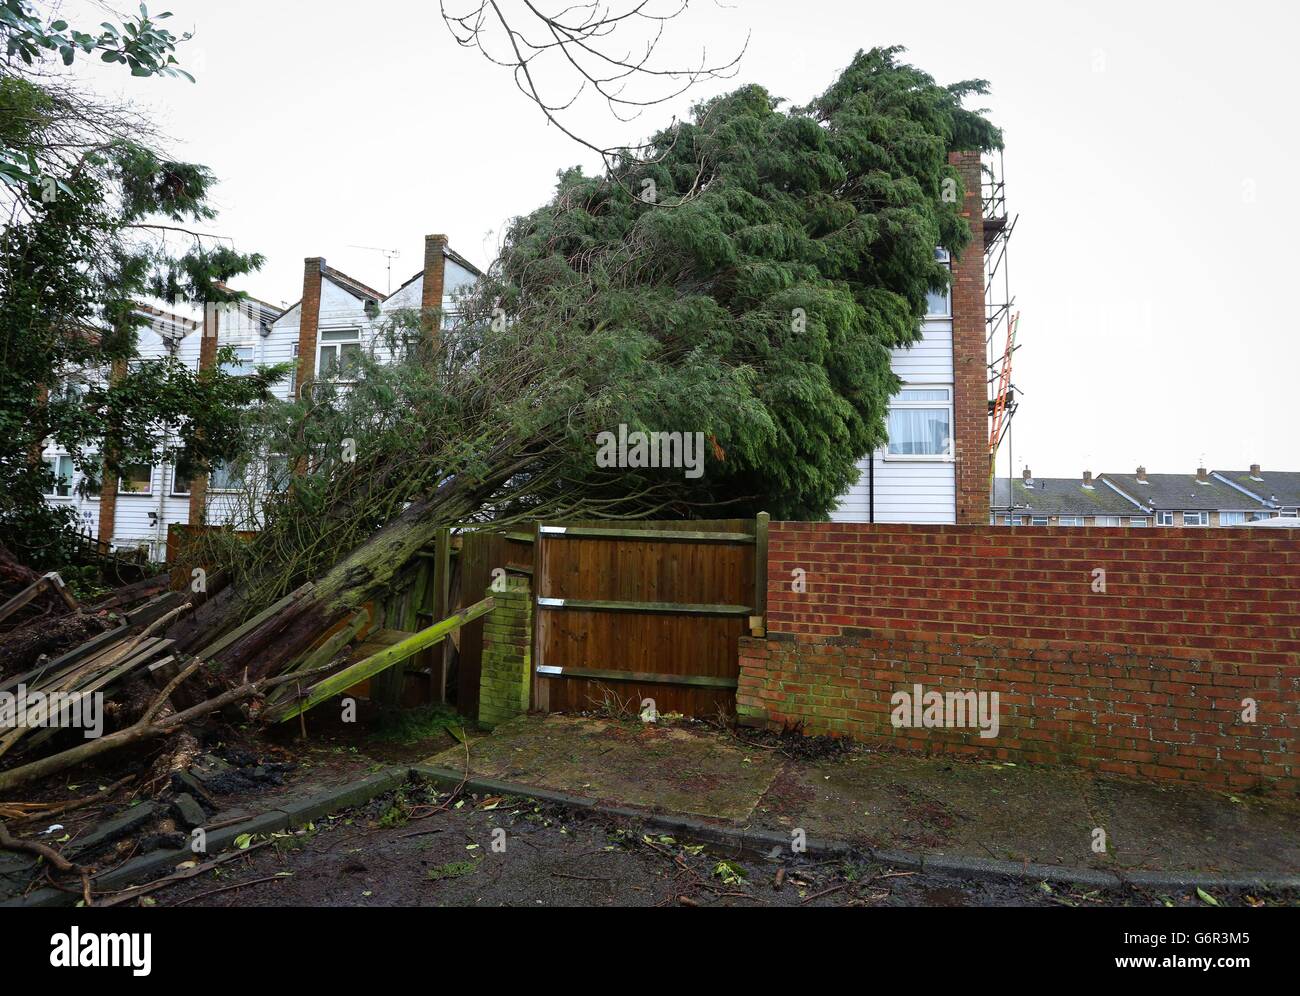 A leylandii tree fell on a house in Walderslade, Kent, on Christmas eve and has still not been moved following a dispute over who is responsible for it. Stock Photo